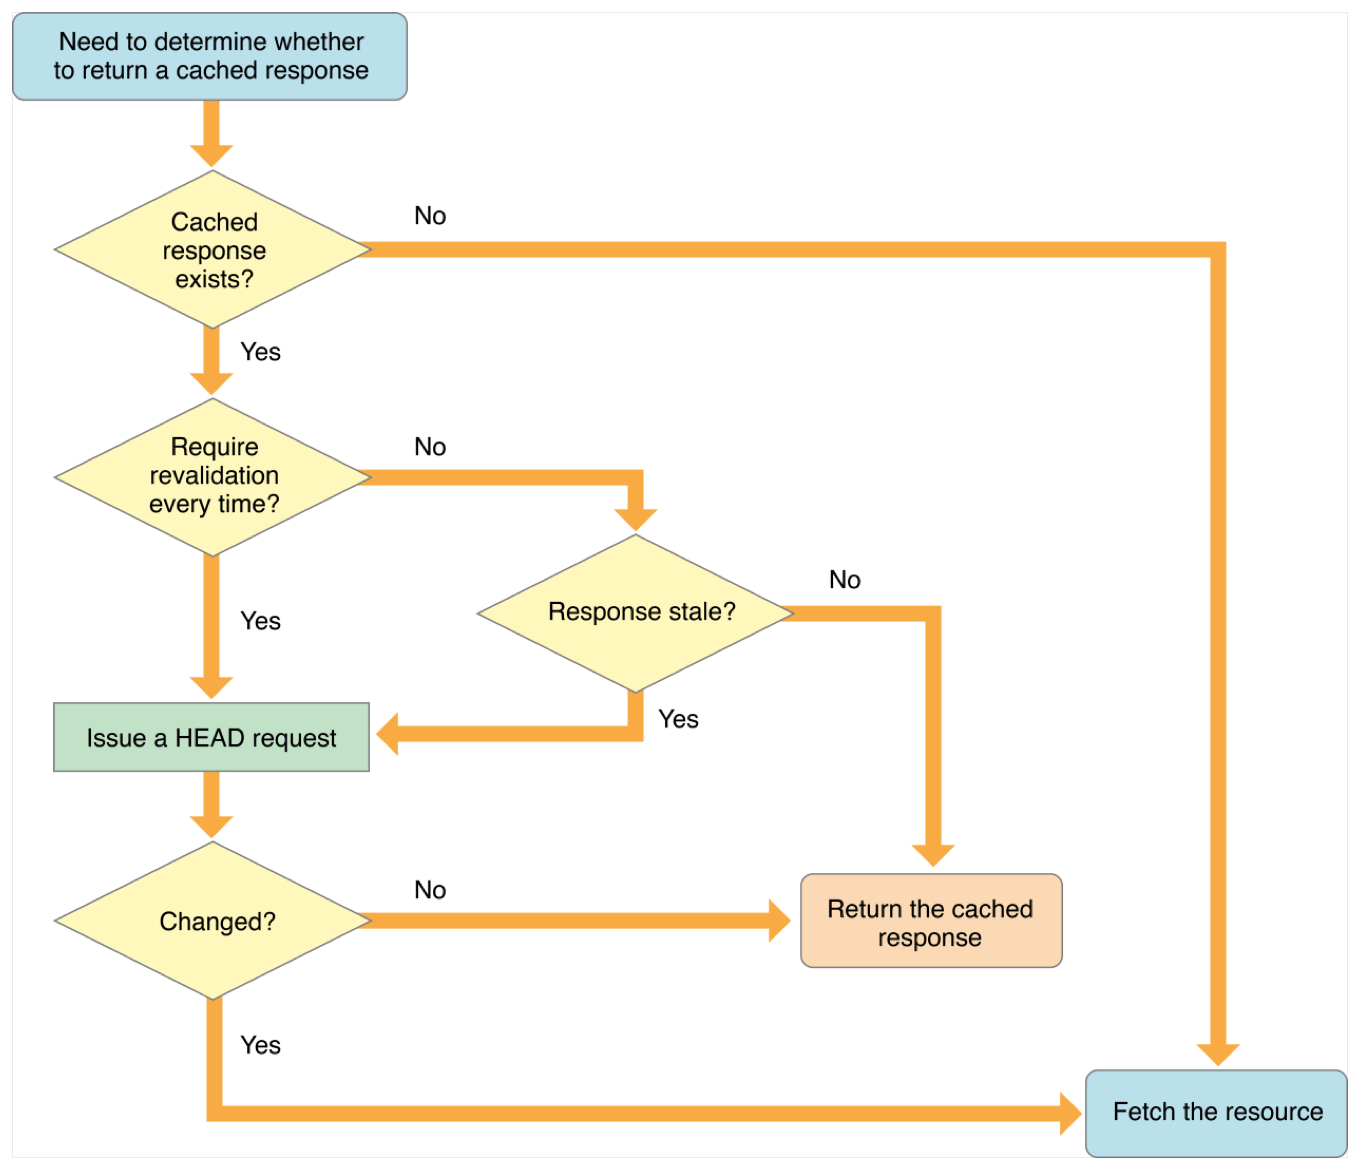 NSURLRequestUseProtocolCachePolicy decision tree for HTTP and HTTPS. Copyright Apple.com